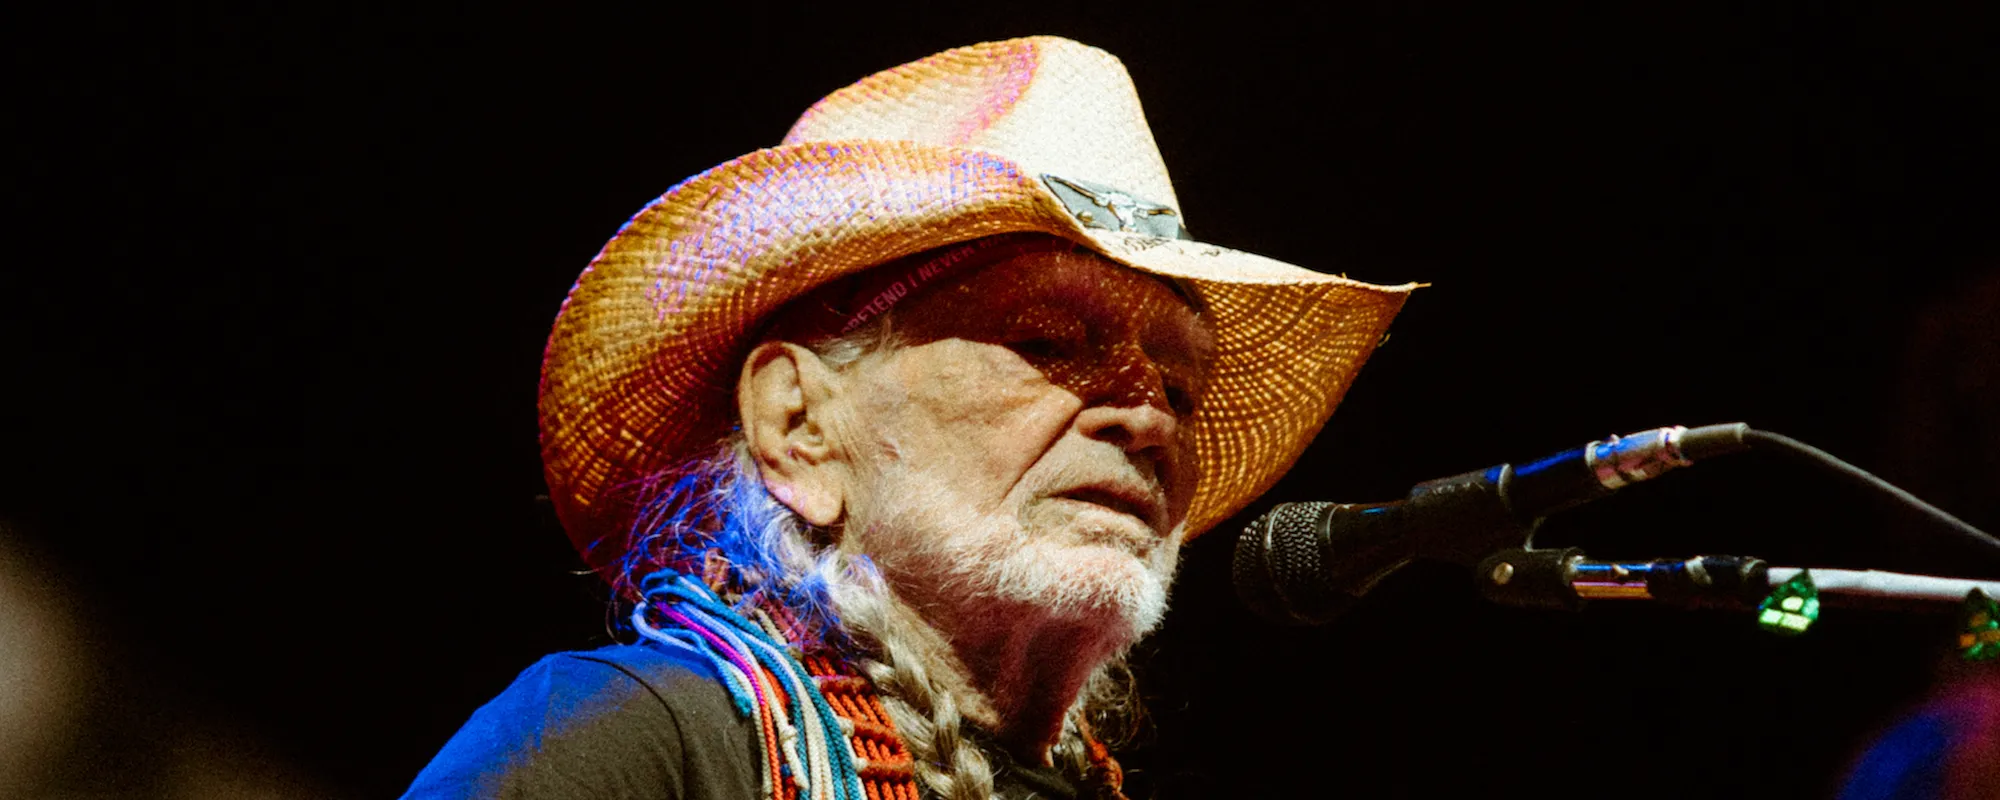 Farm Aid to Feature Willie Nelson, Chris Stapleton and Sheryl Crow, Neil Young Bows Out Again